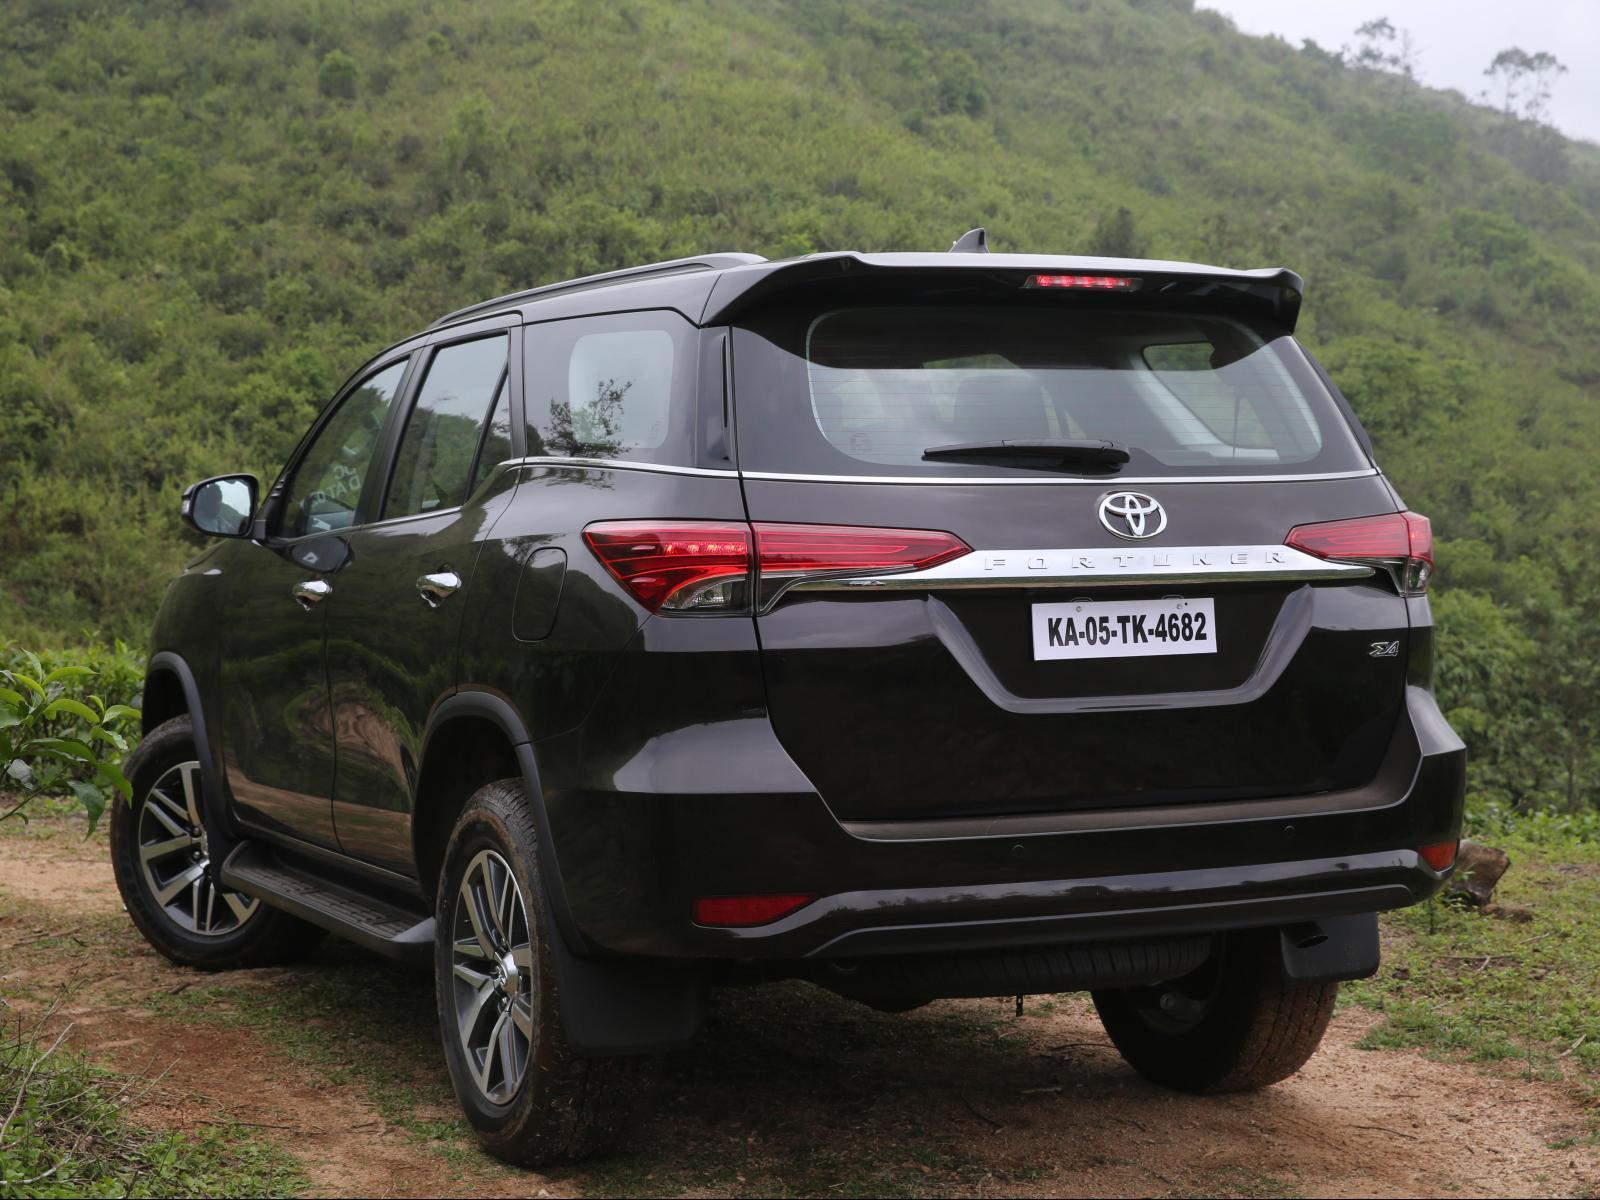 Black Fortuner Hd Wallpapers 1080p For Mobile - Fortuner Camionetas